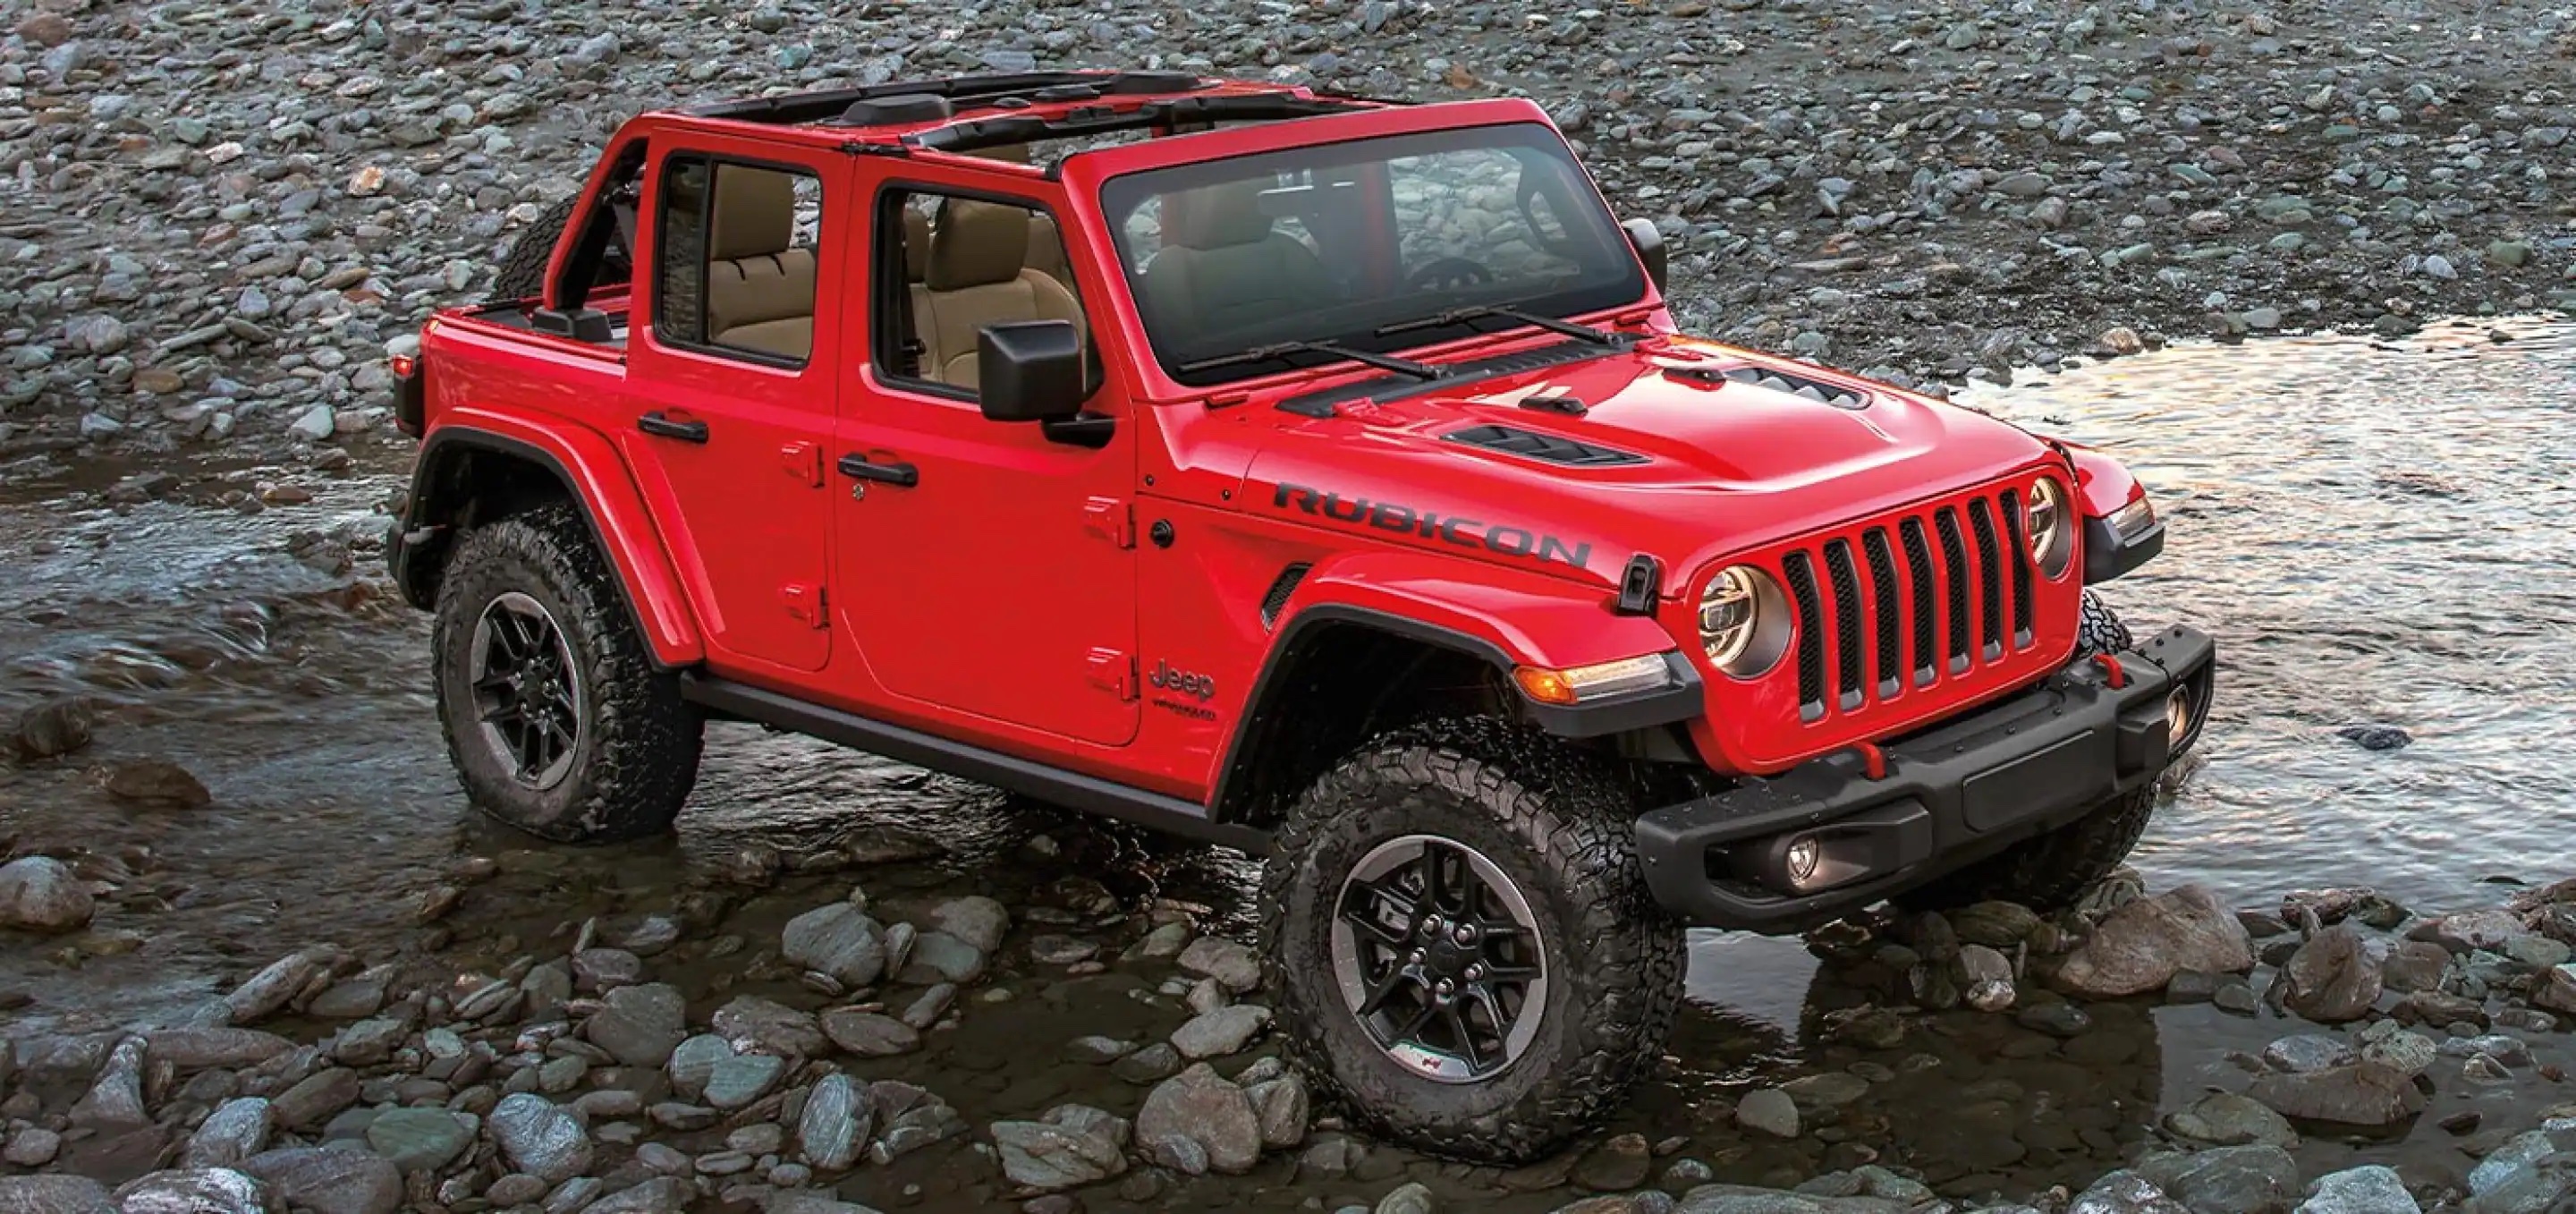 2022 Jeep Wrangler Unlimited for Sale near Westfield, IN - Academy Jeep